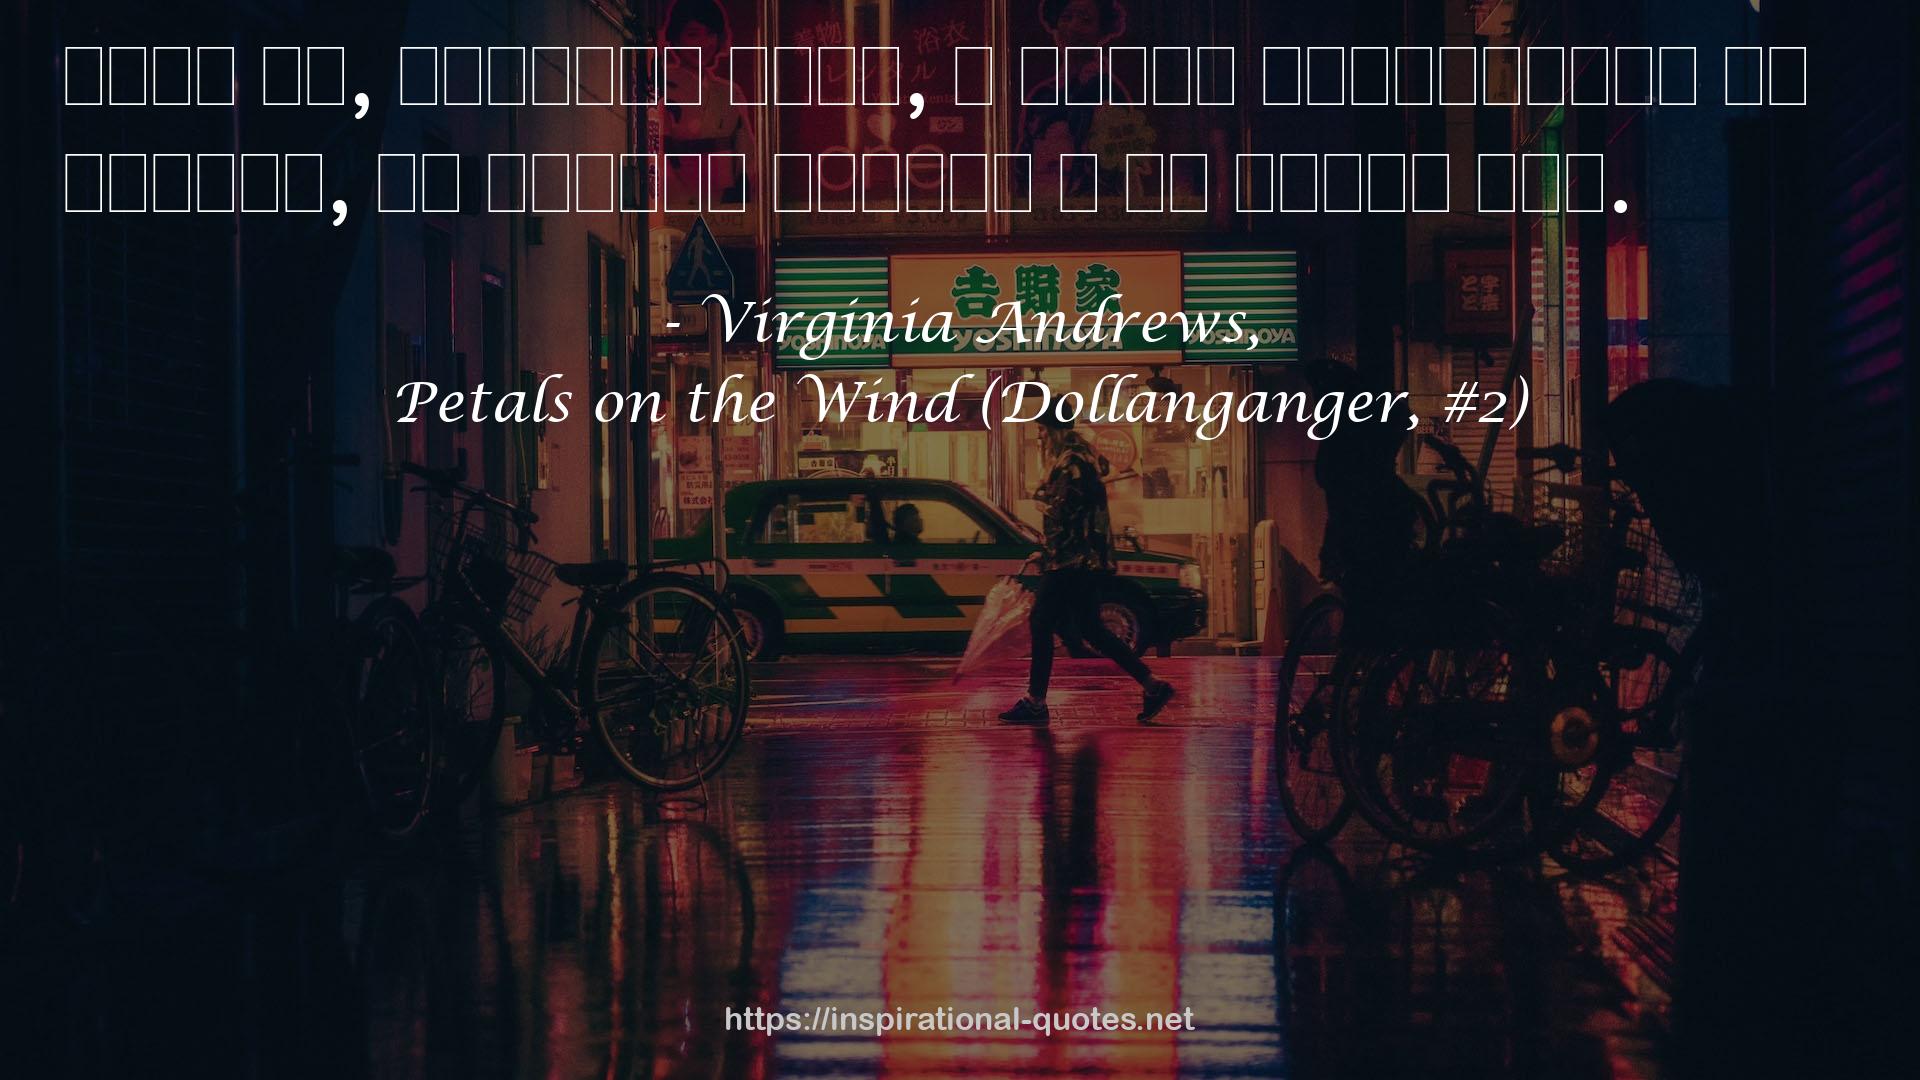 Petals on the Wind (Dollanganger, #2) QUOTES